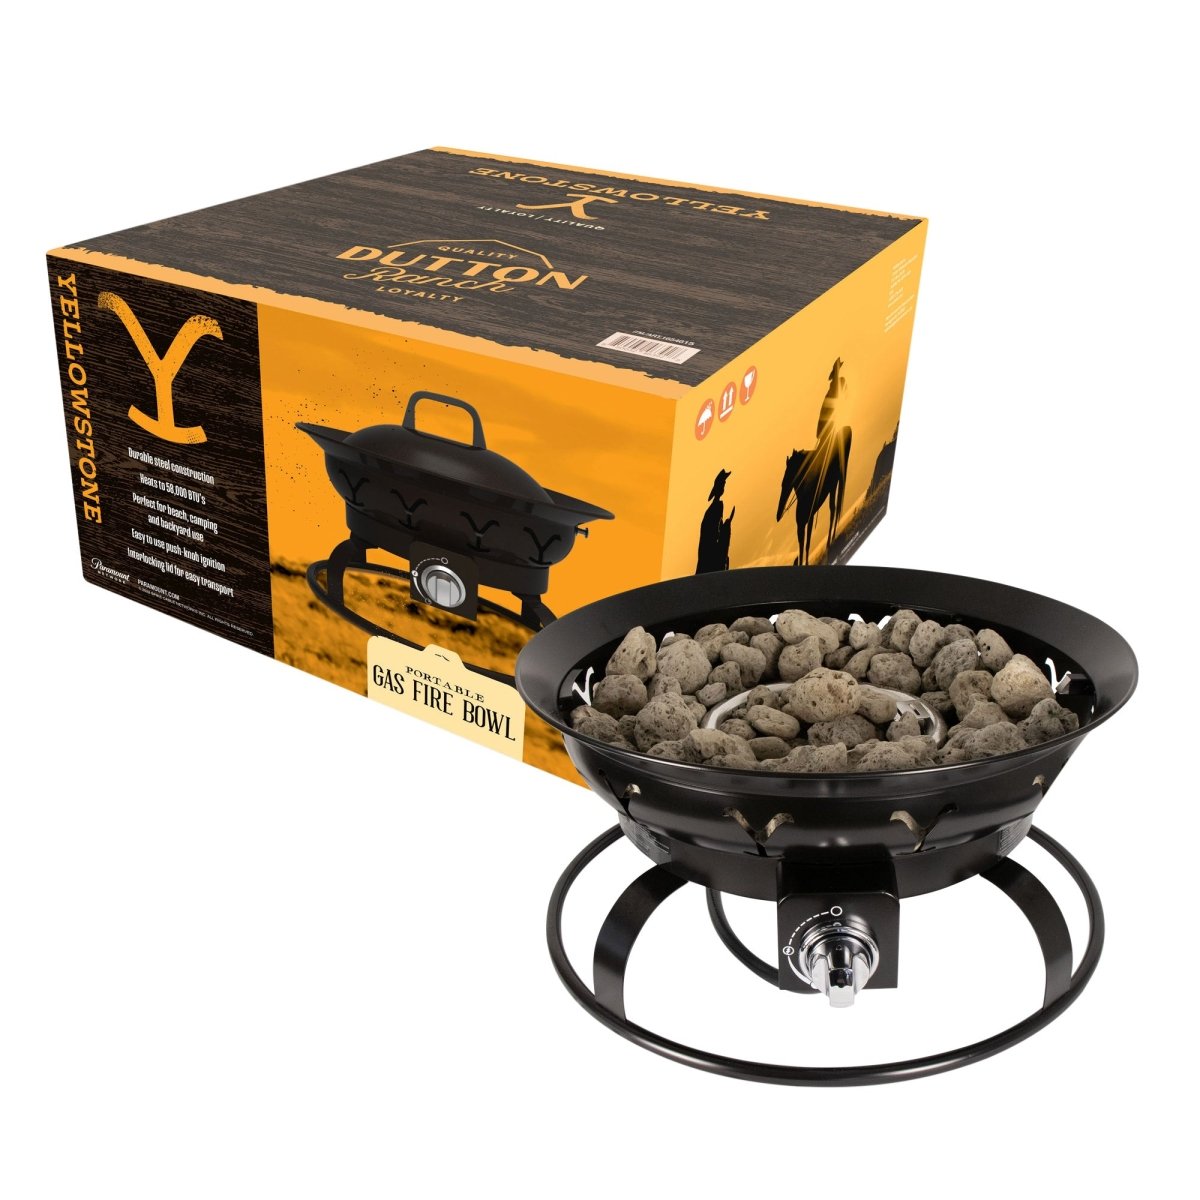 Yellowstone Gas Fire Bowl - Alpine Outlets